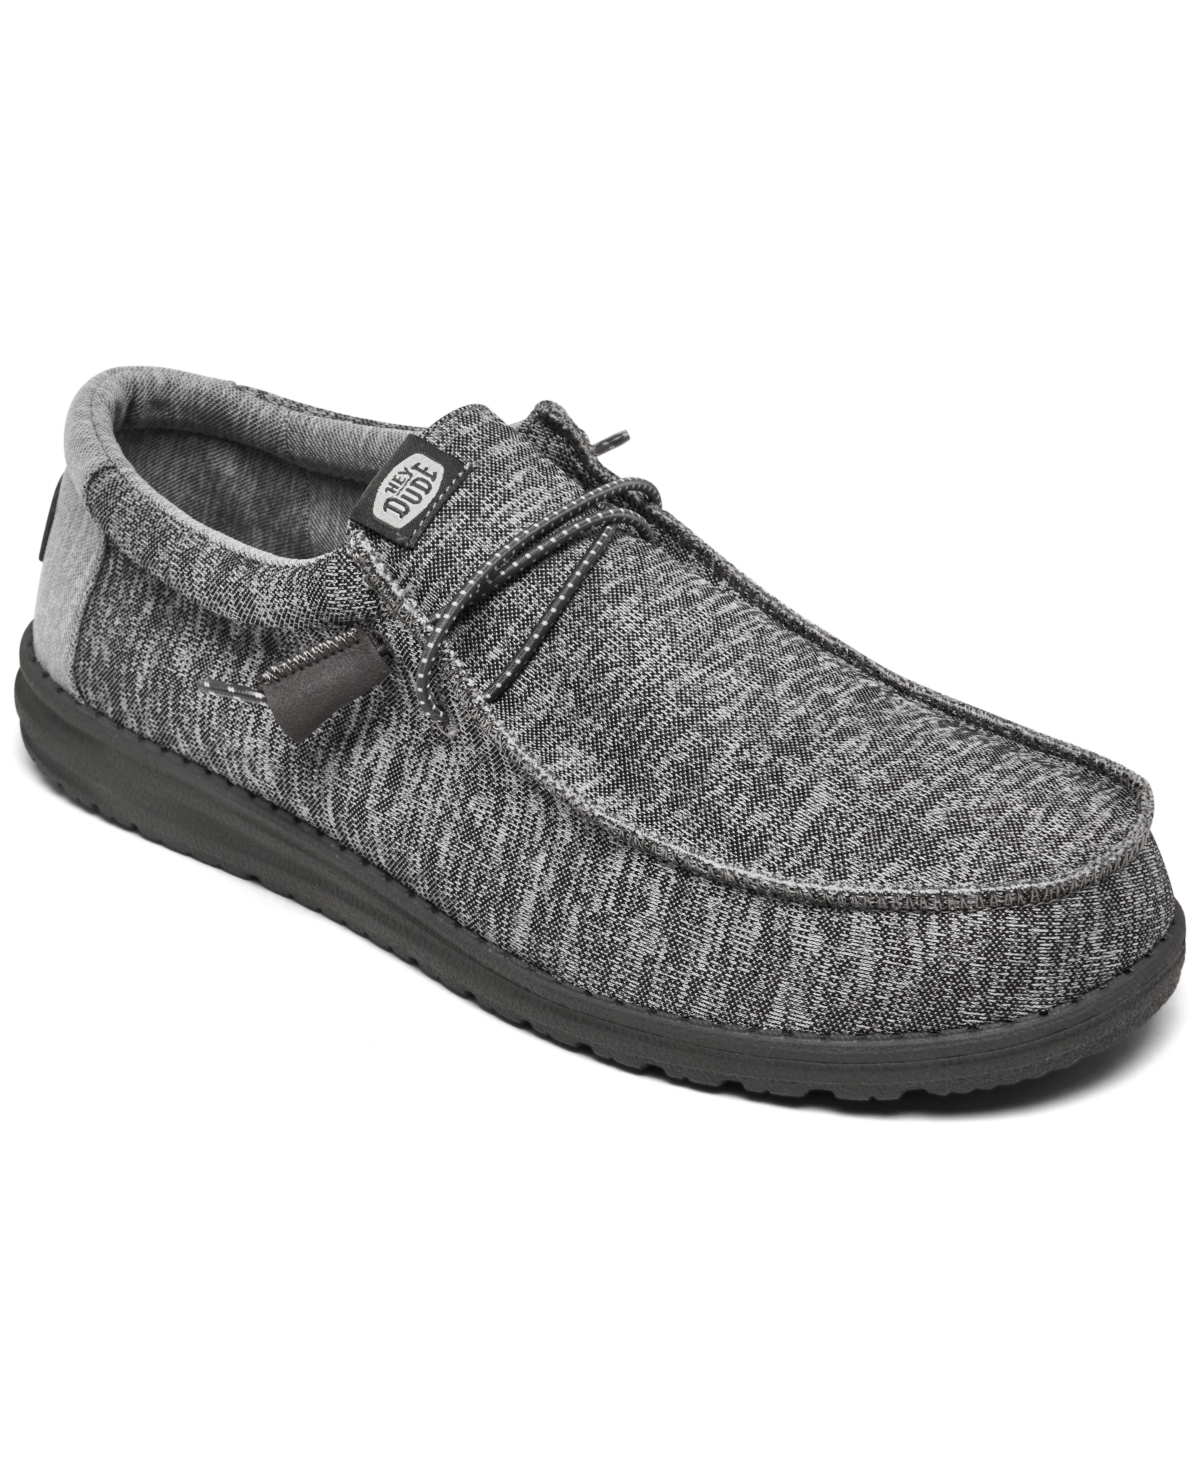 Men's Wally Sport Knit Casual Moccasin Sneakers from Finish Line - Black